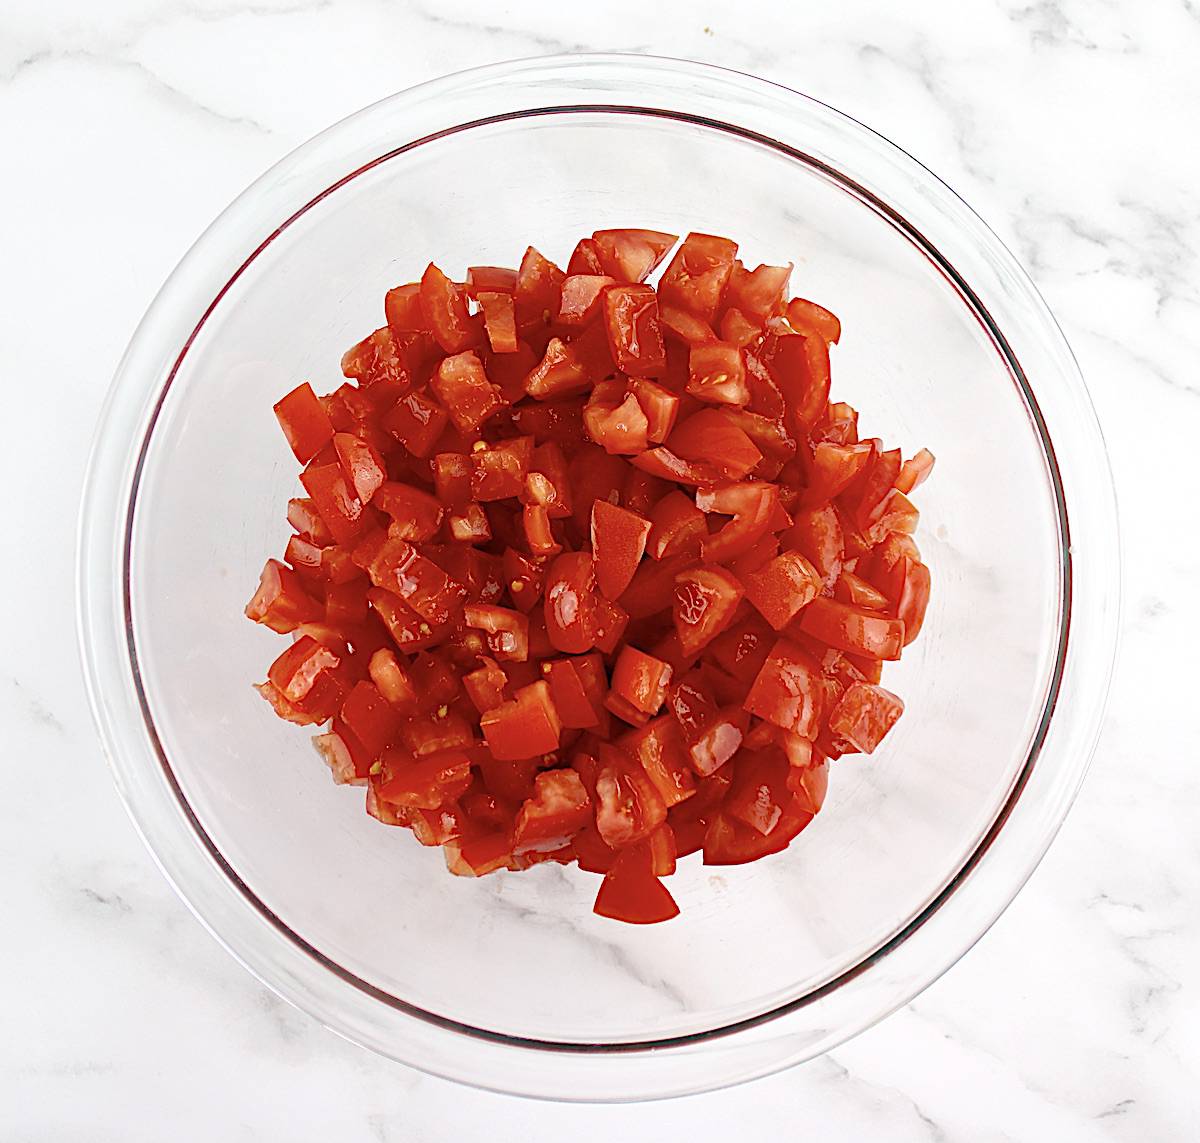 diced tomatoes in glass bowl